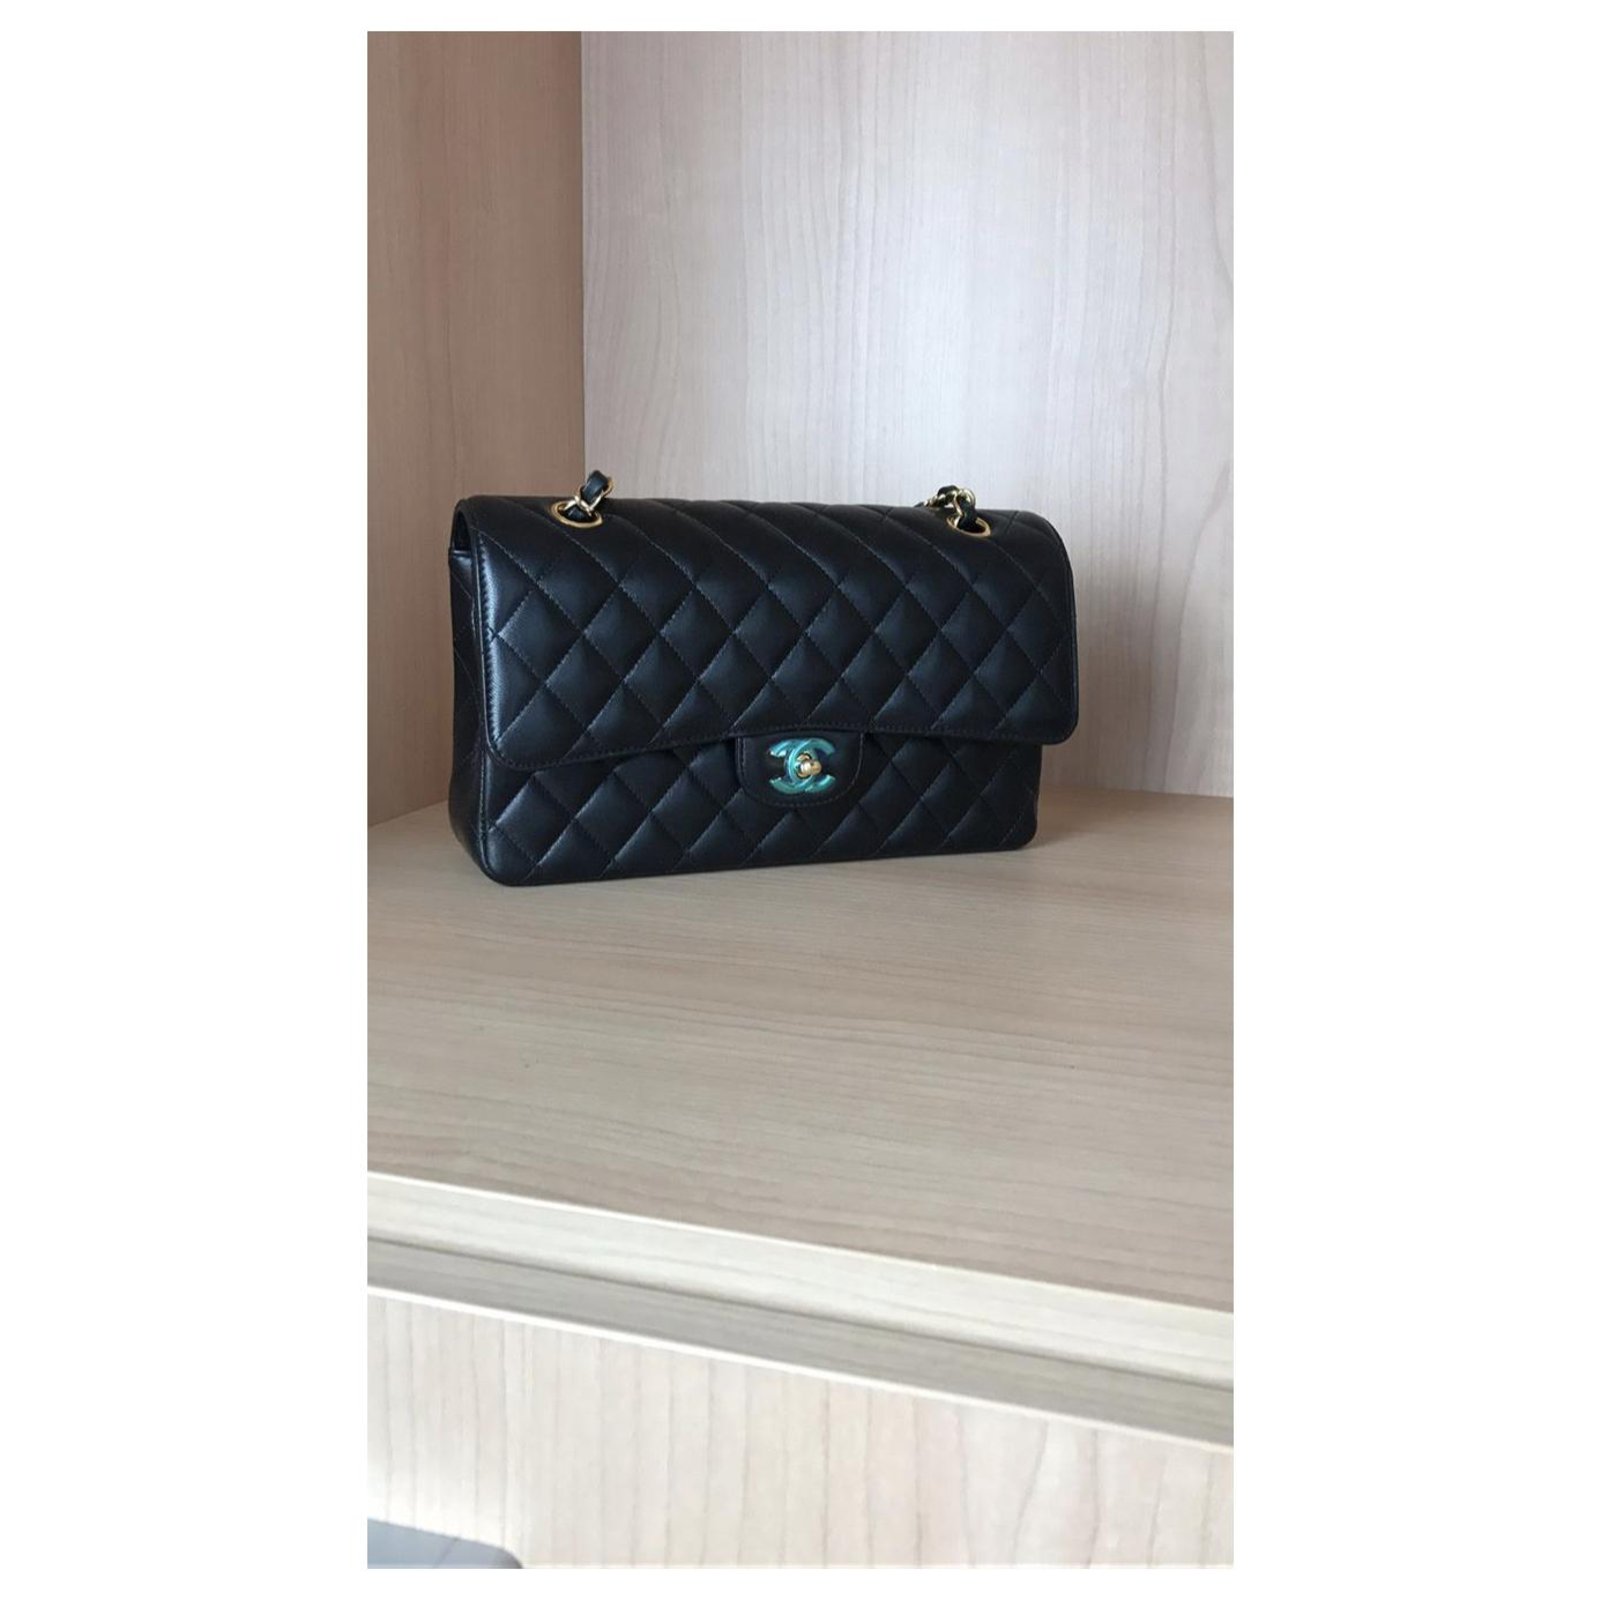 CHANEL lined FLAP CLASSIC BAG